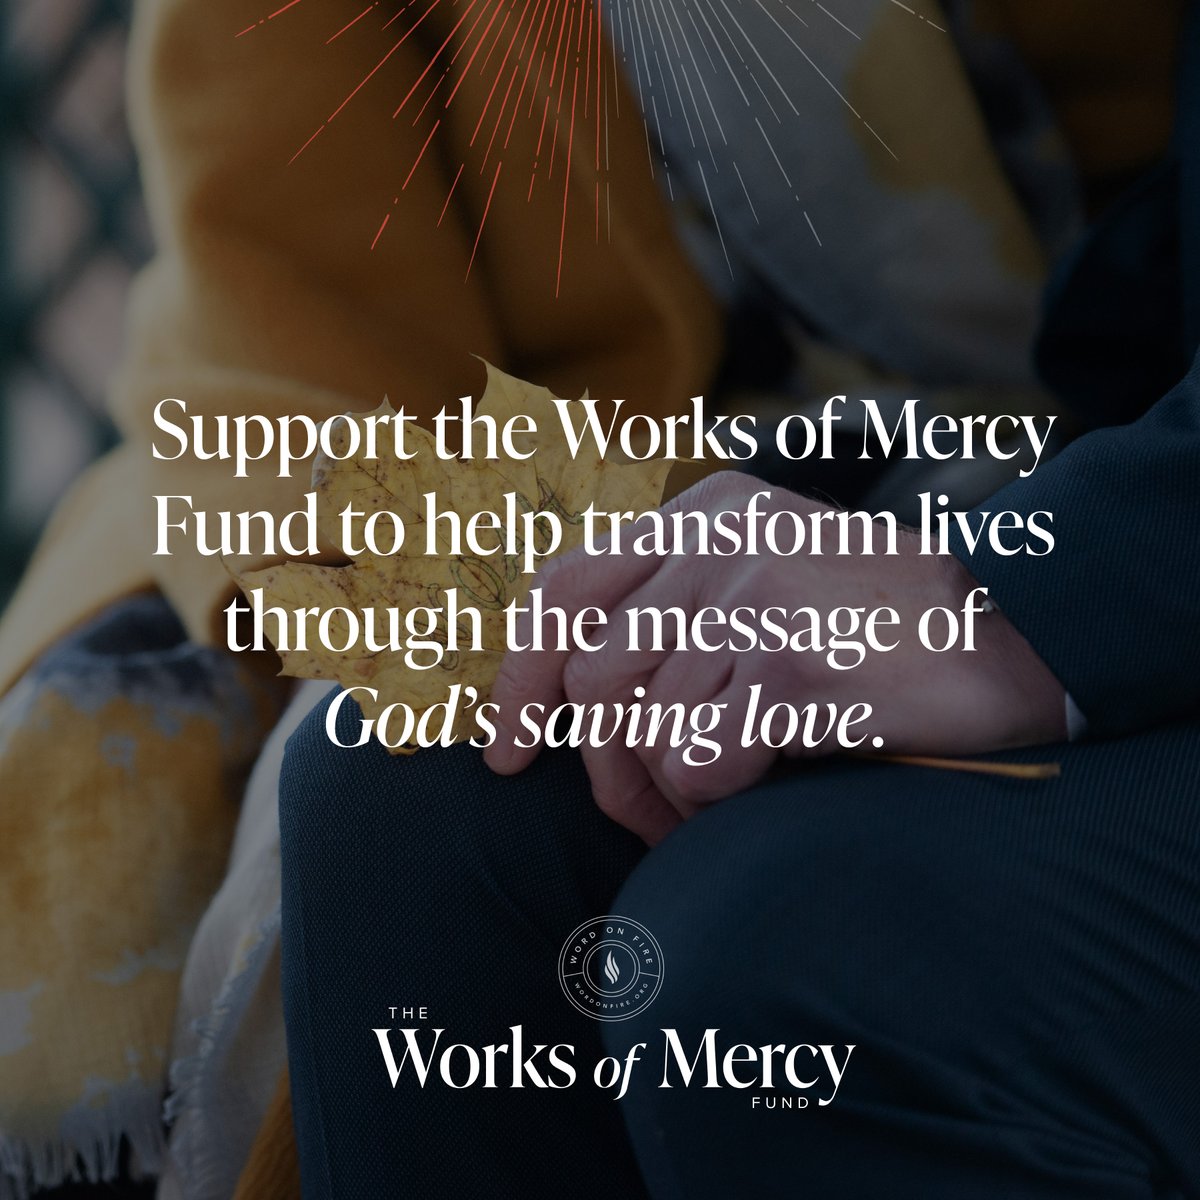 Word on Fire’s Works of Mercy Fund is a way to provide evangelical resources to those on the margins. As part of this initiative, we bring you Bishop Barron’s reflections on the seven Spiritual Works of Mercy: wordonfire.org/mercy/#works